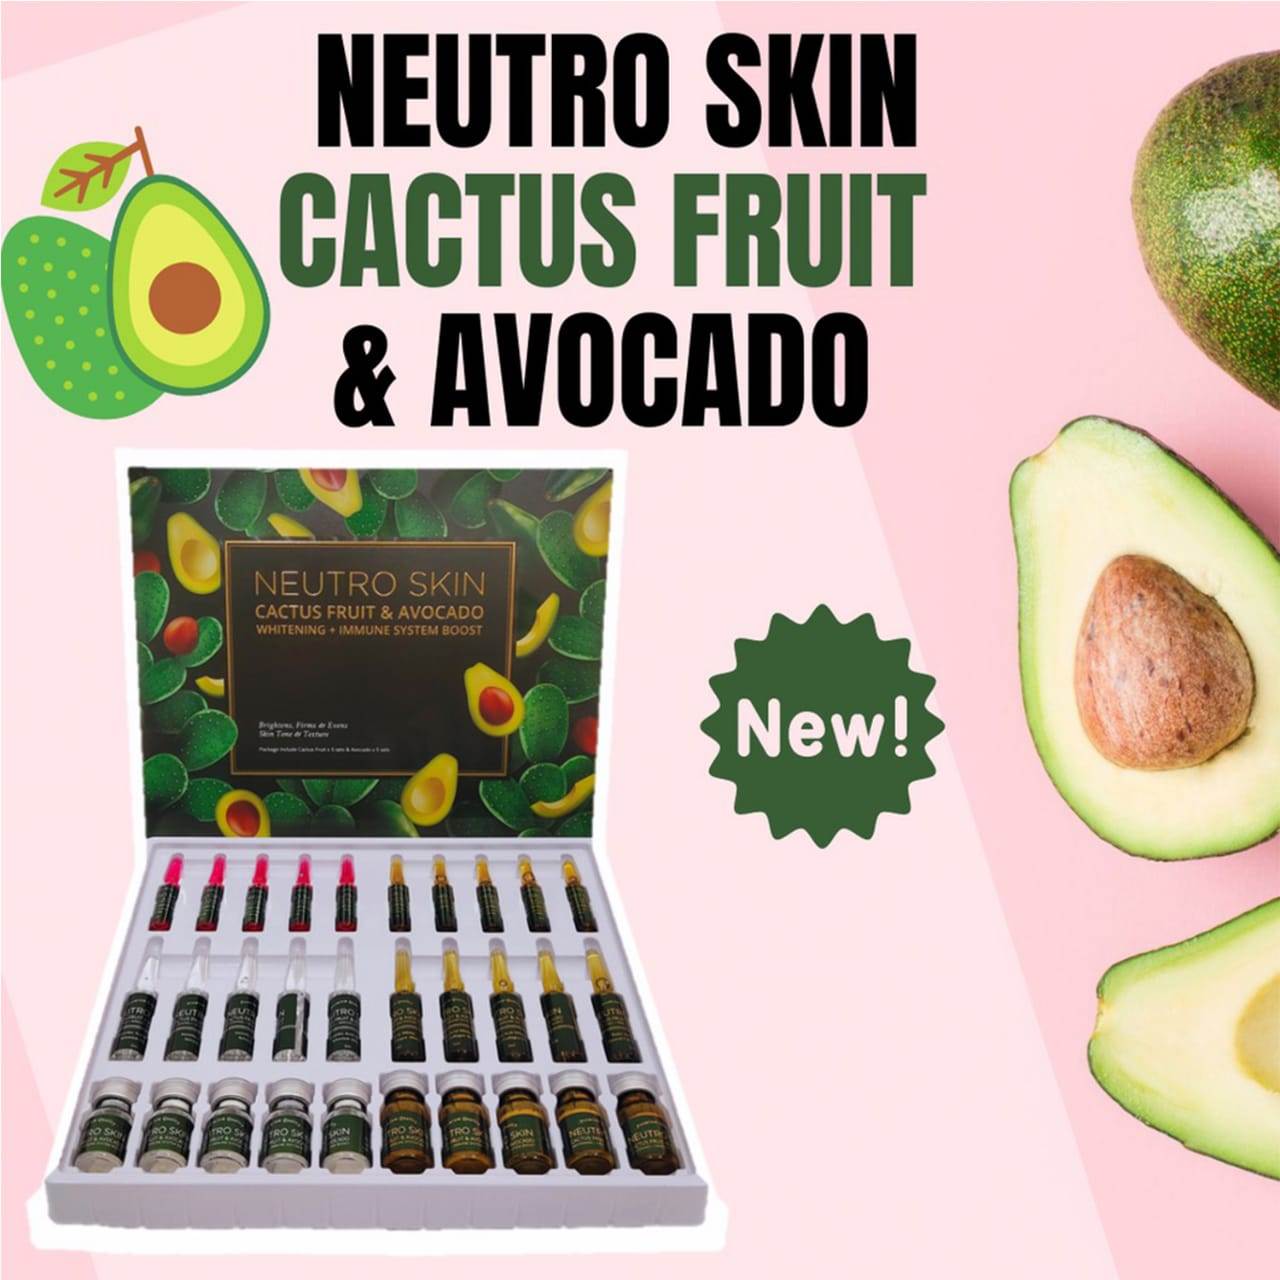 Neutro Skin Cactus fruit and avocado Glutathione Injections reviews